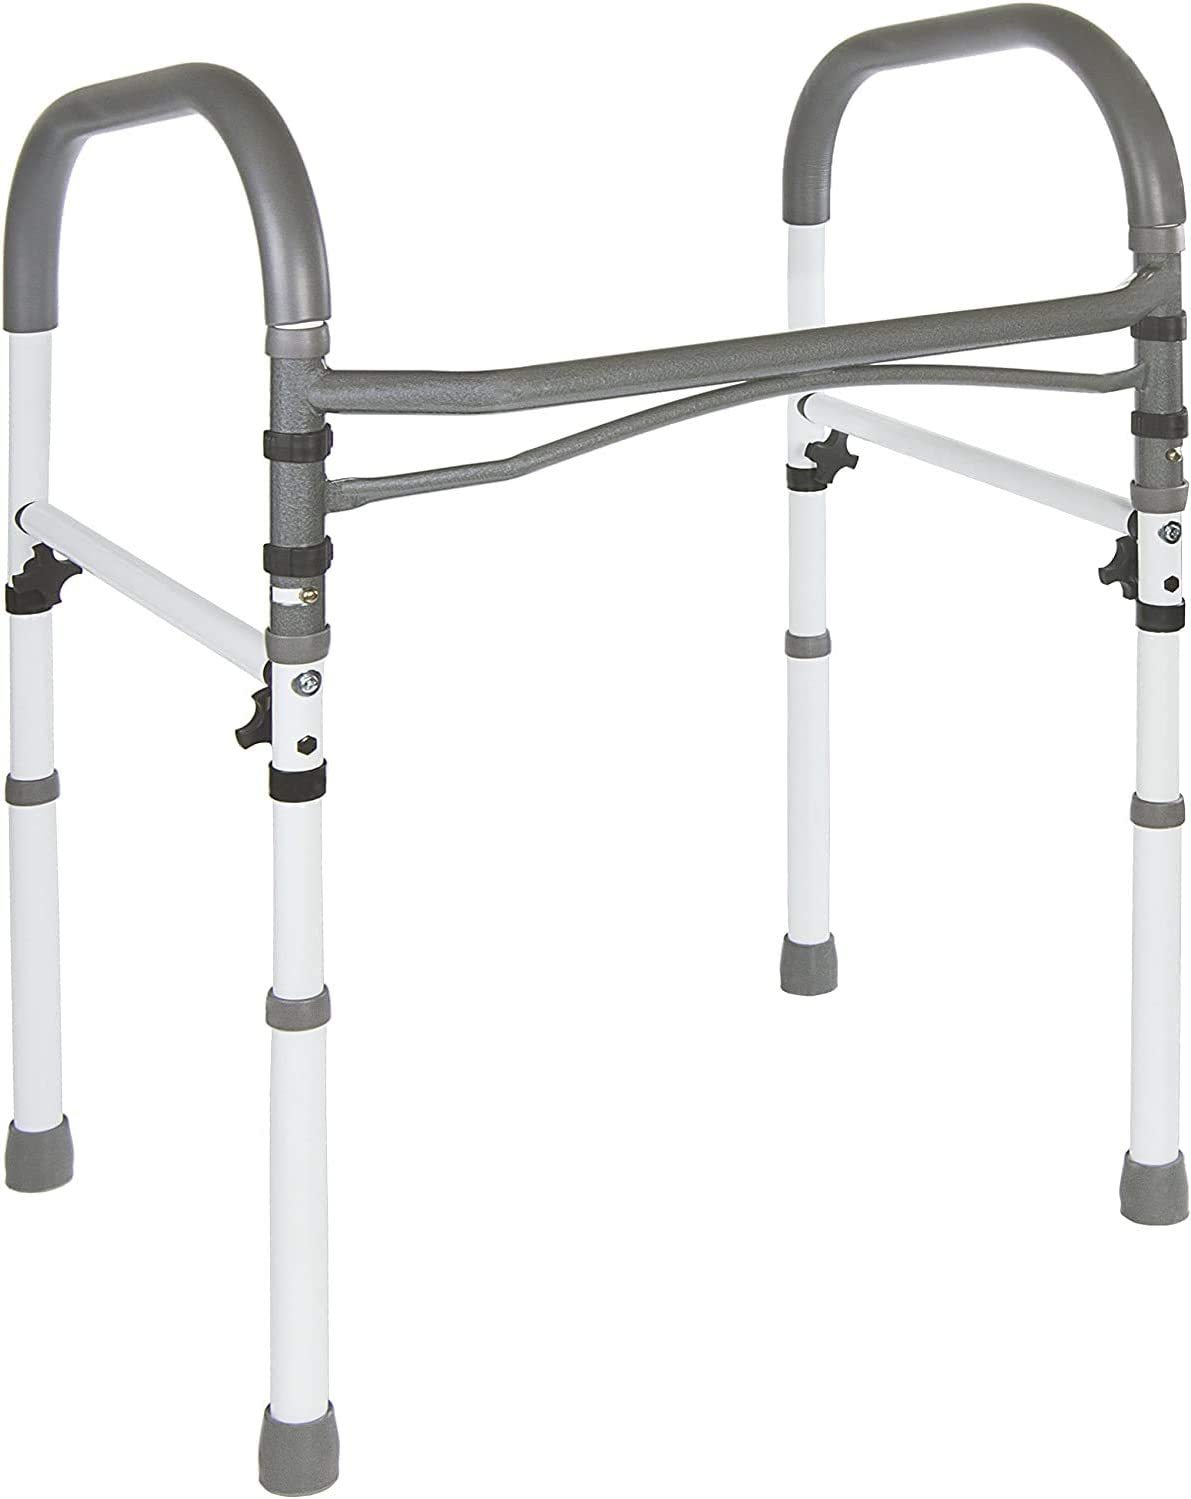 Primary image for Vaunn Deluxe Bathroom Safety Toilet Rail - Gray, Adjustable Toilet Safety Frame,